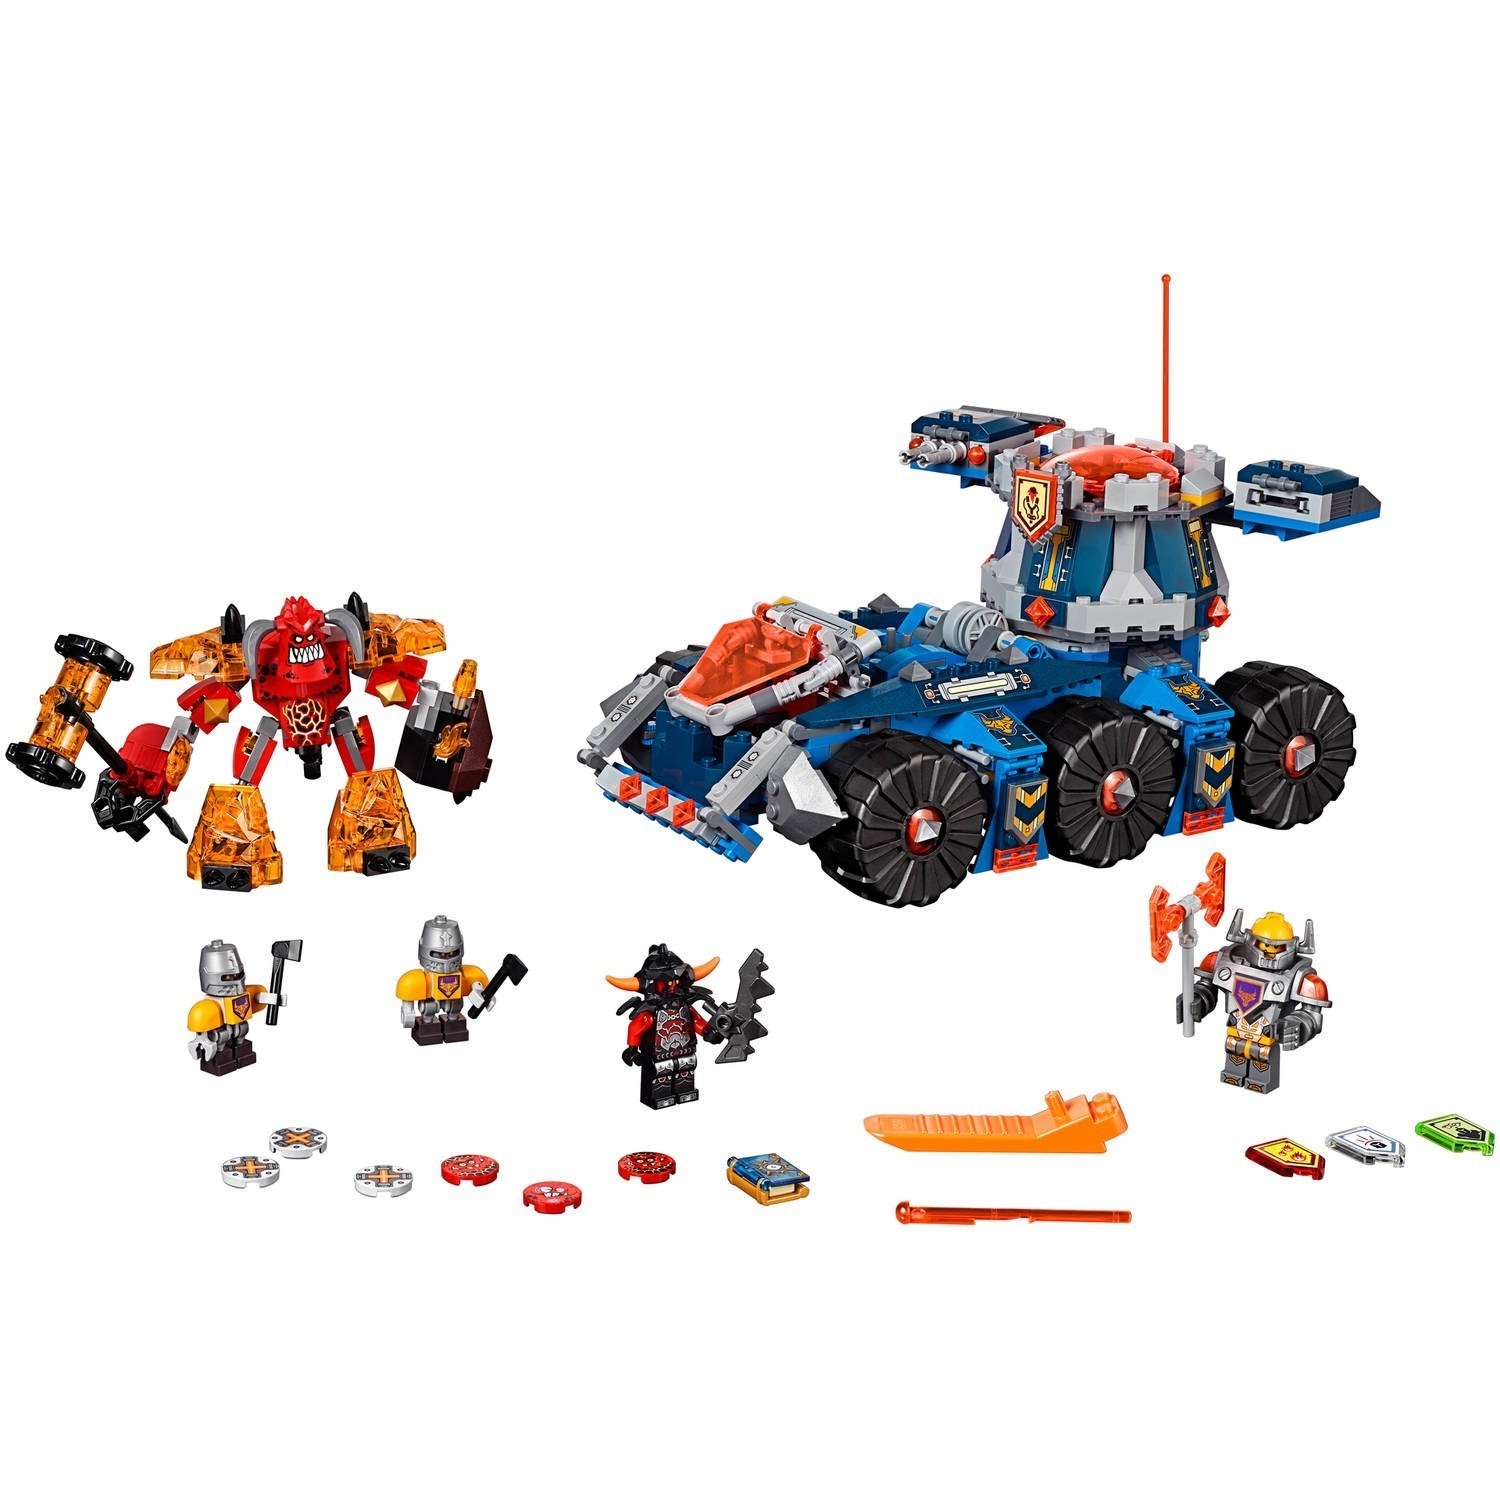 LEGO NEXO KNIGHTS Axl's Tower Carrier, 70322 - image 3 of 6